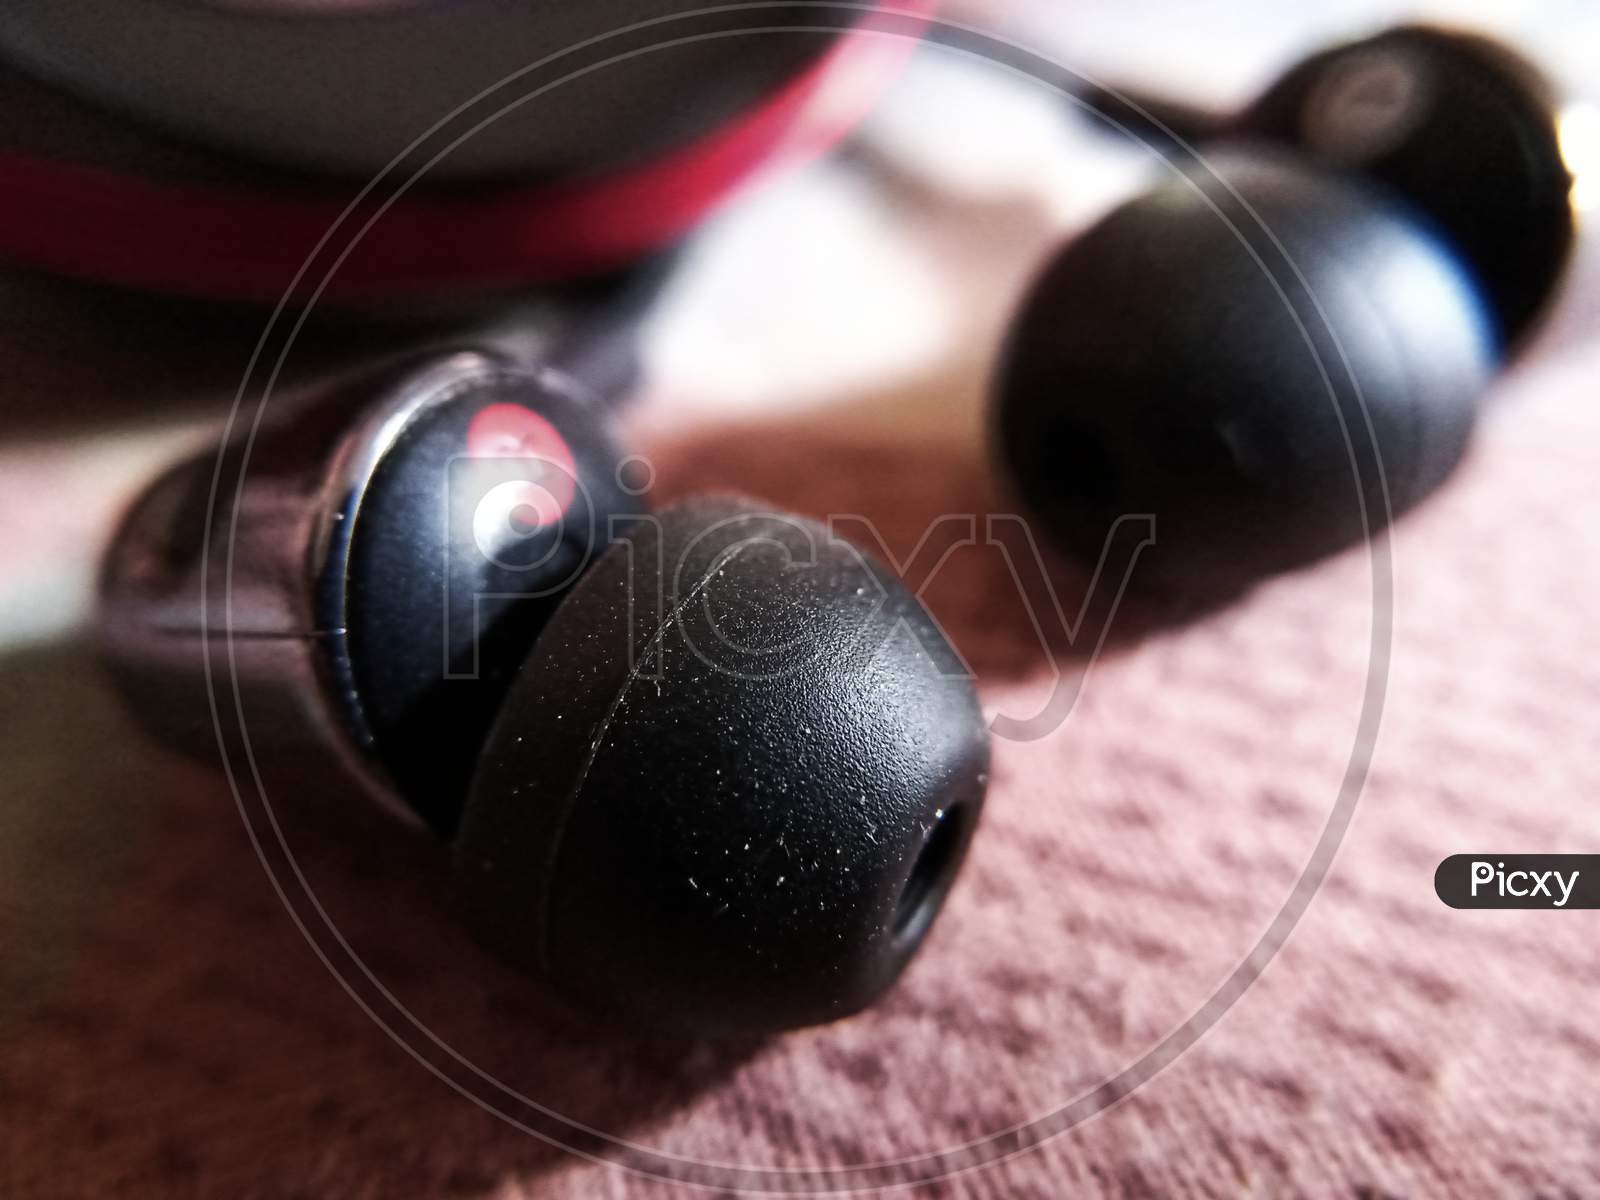 Earphone tips with a red mark.